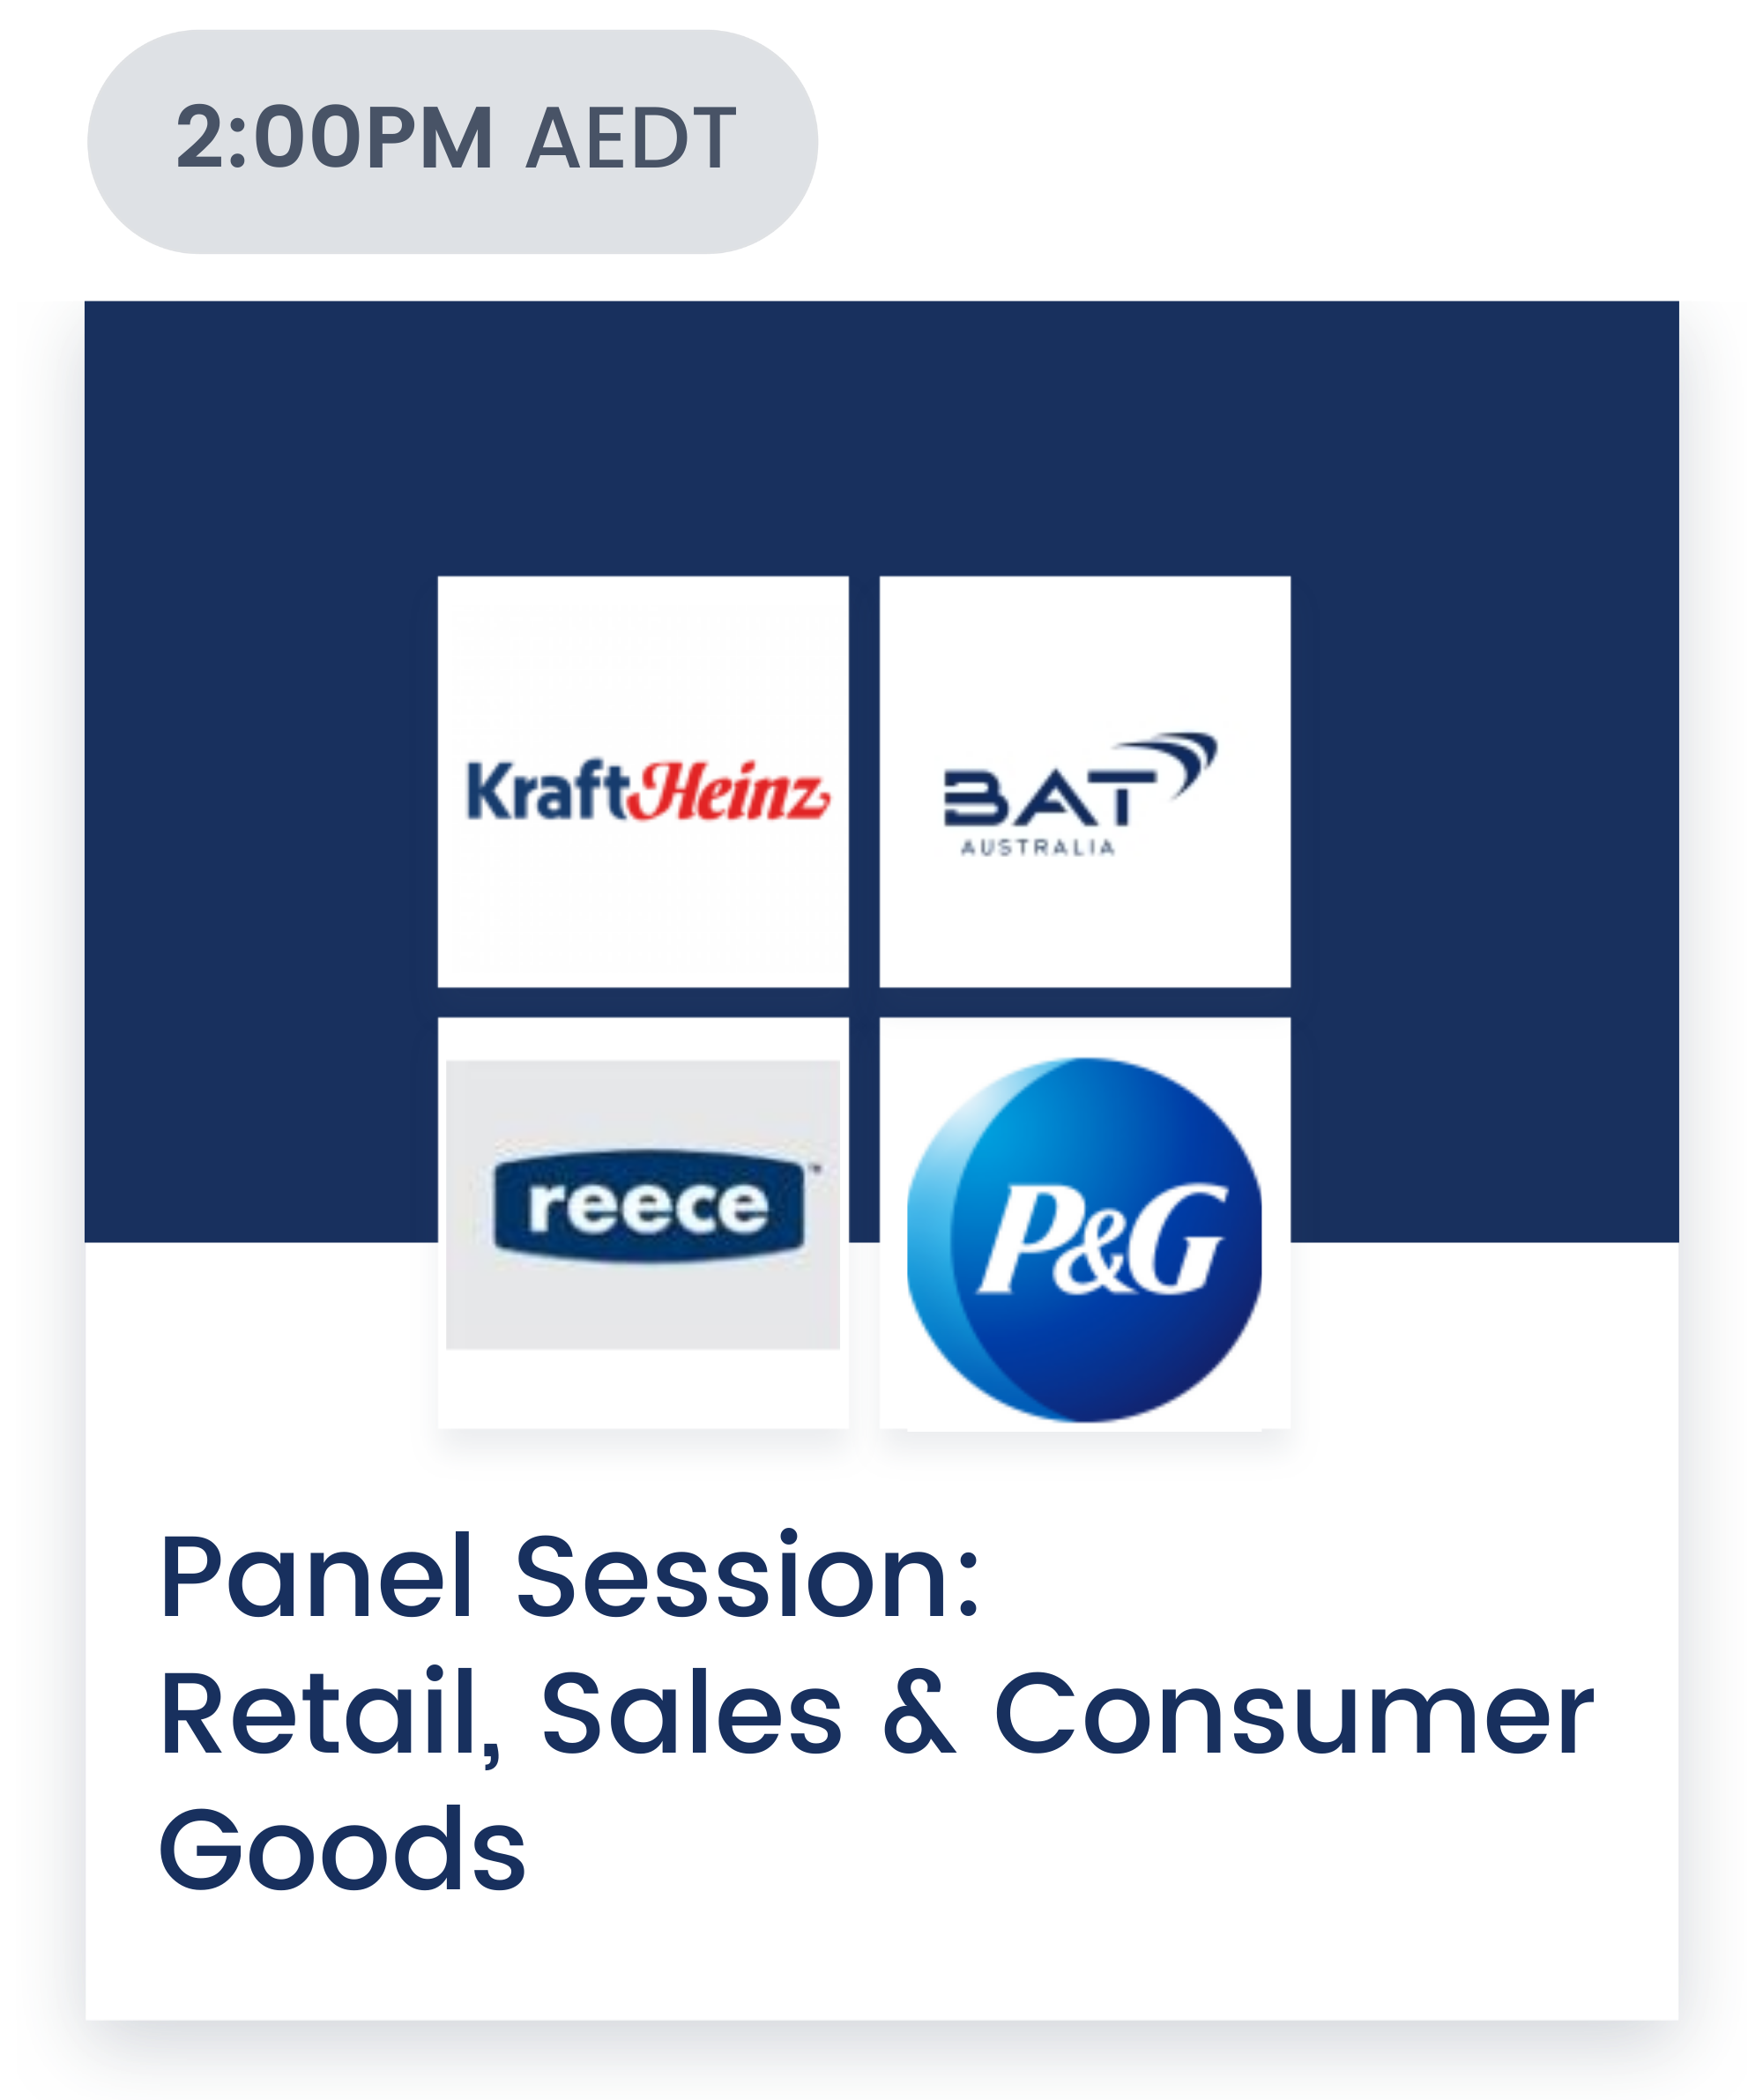 retail-sales-consumer-panel-session_0.png